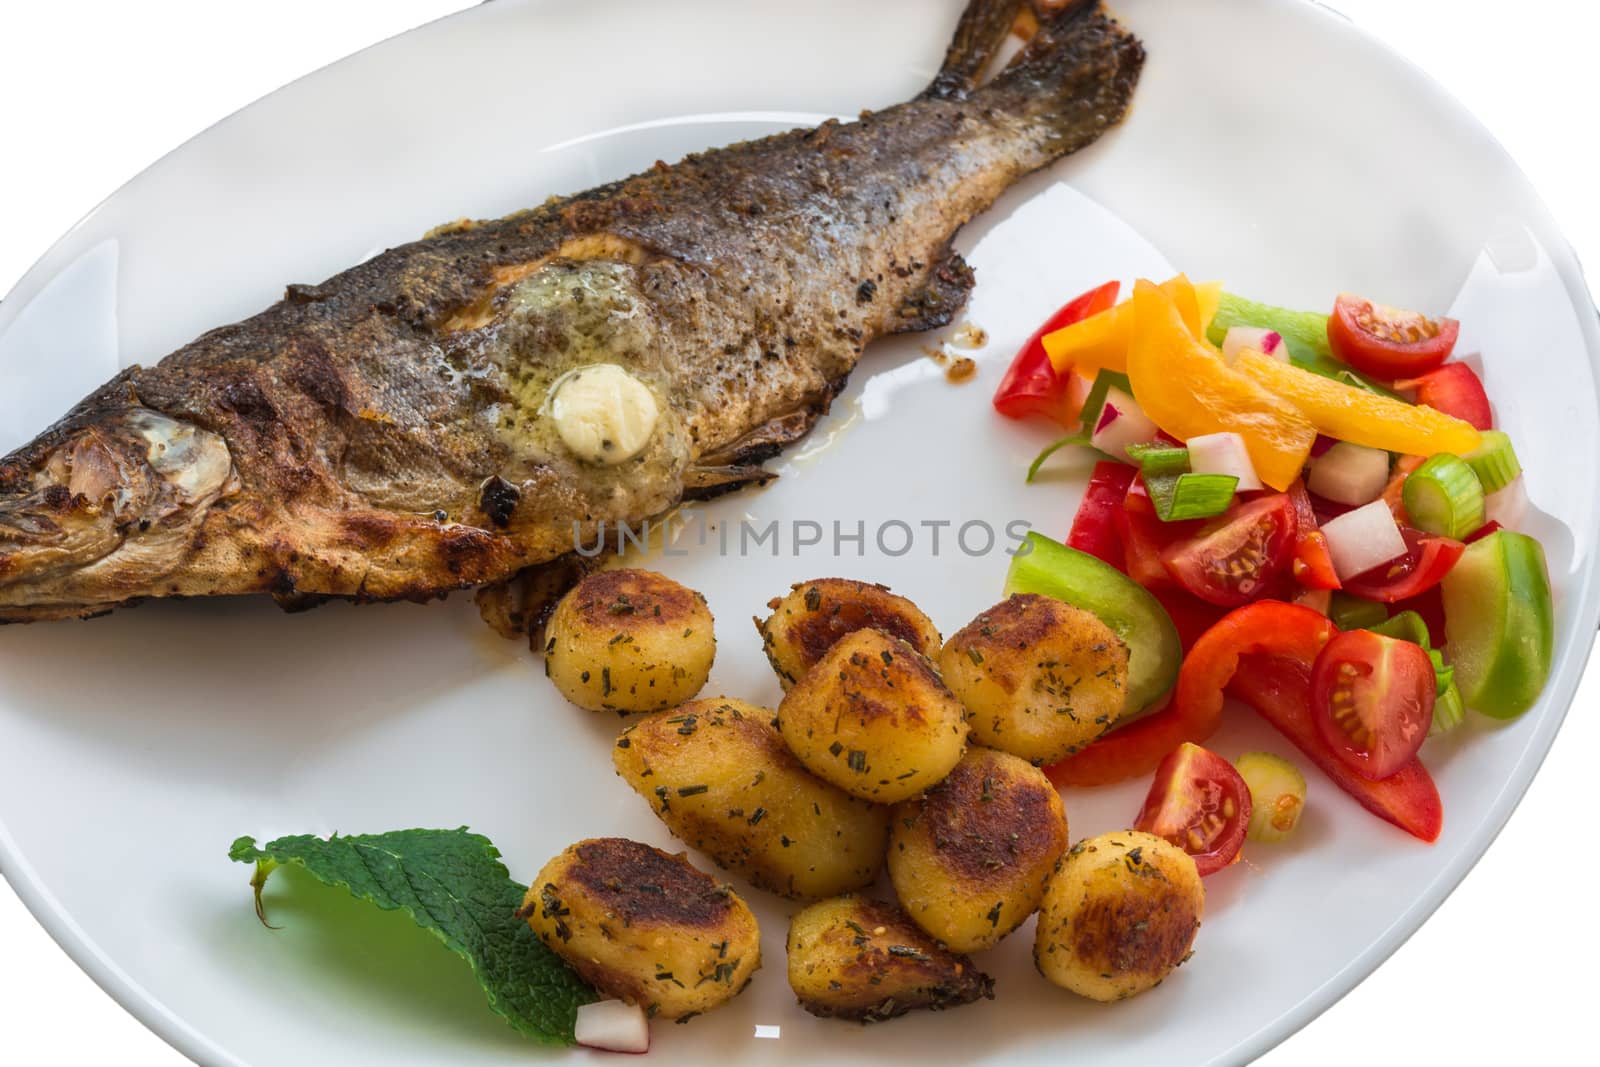 Roasted trout on white plate by JFsPic